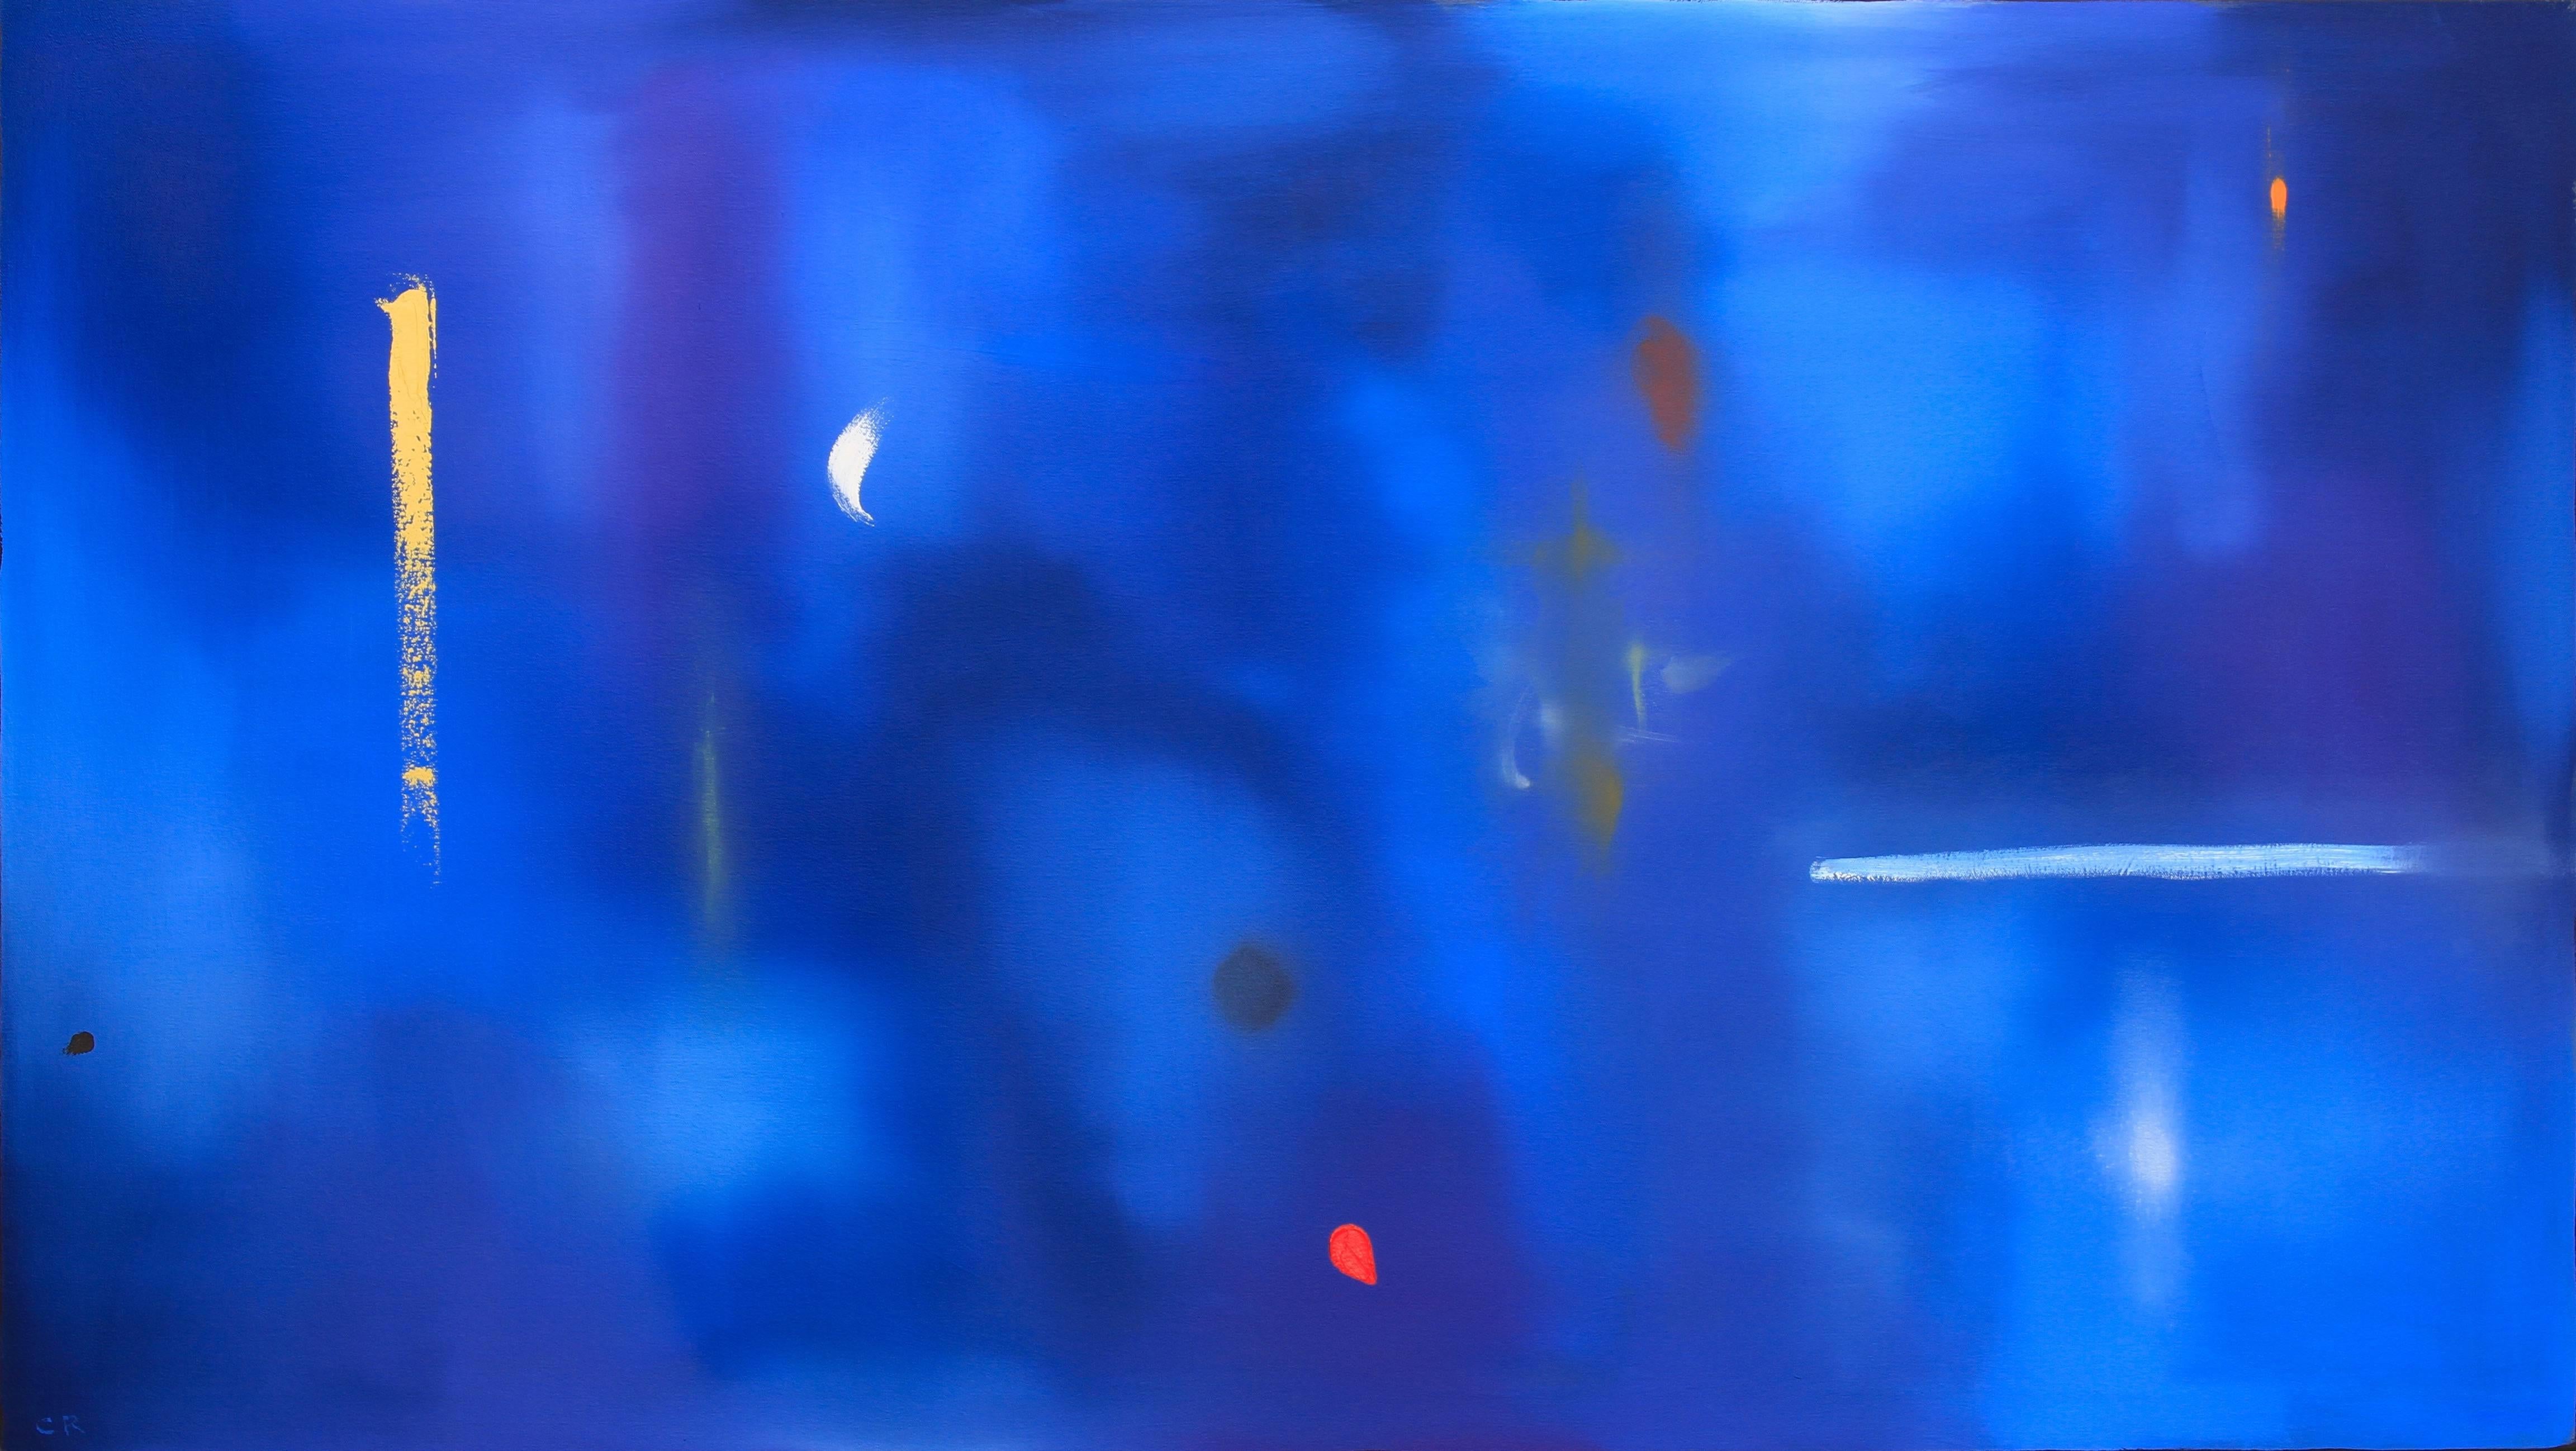 Abstract Painting Curtis Ripley - Nuit de juin